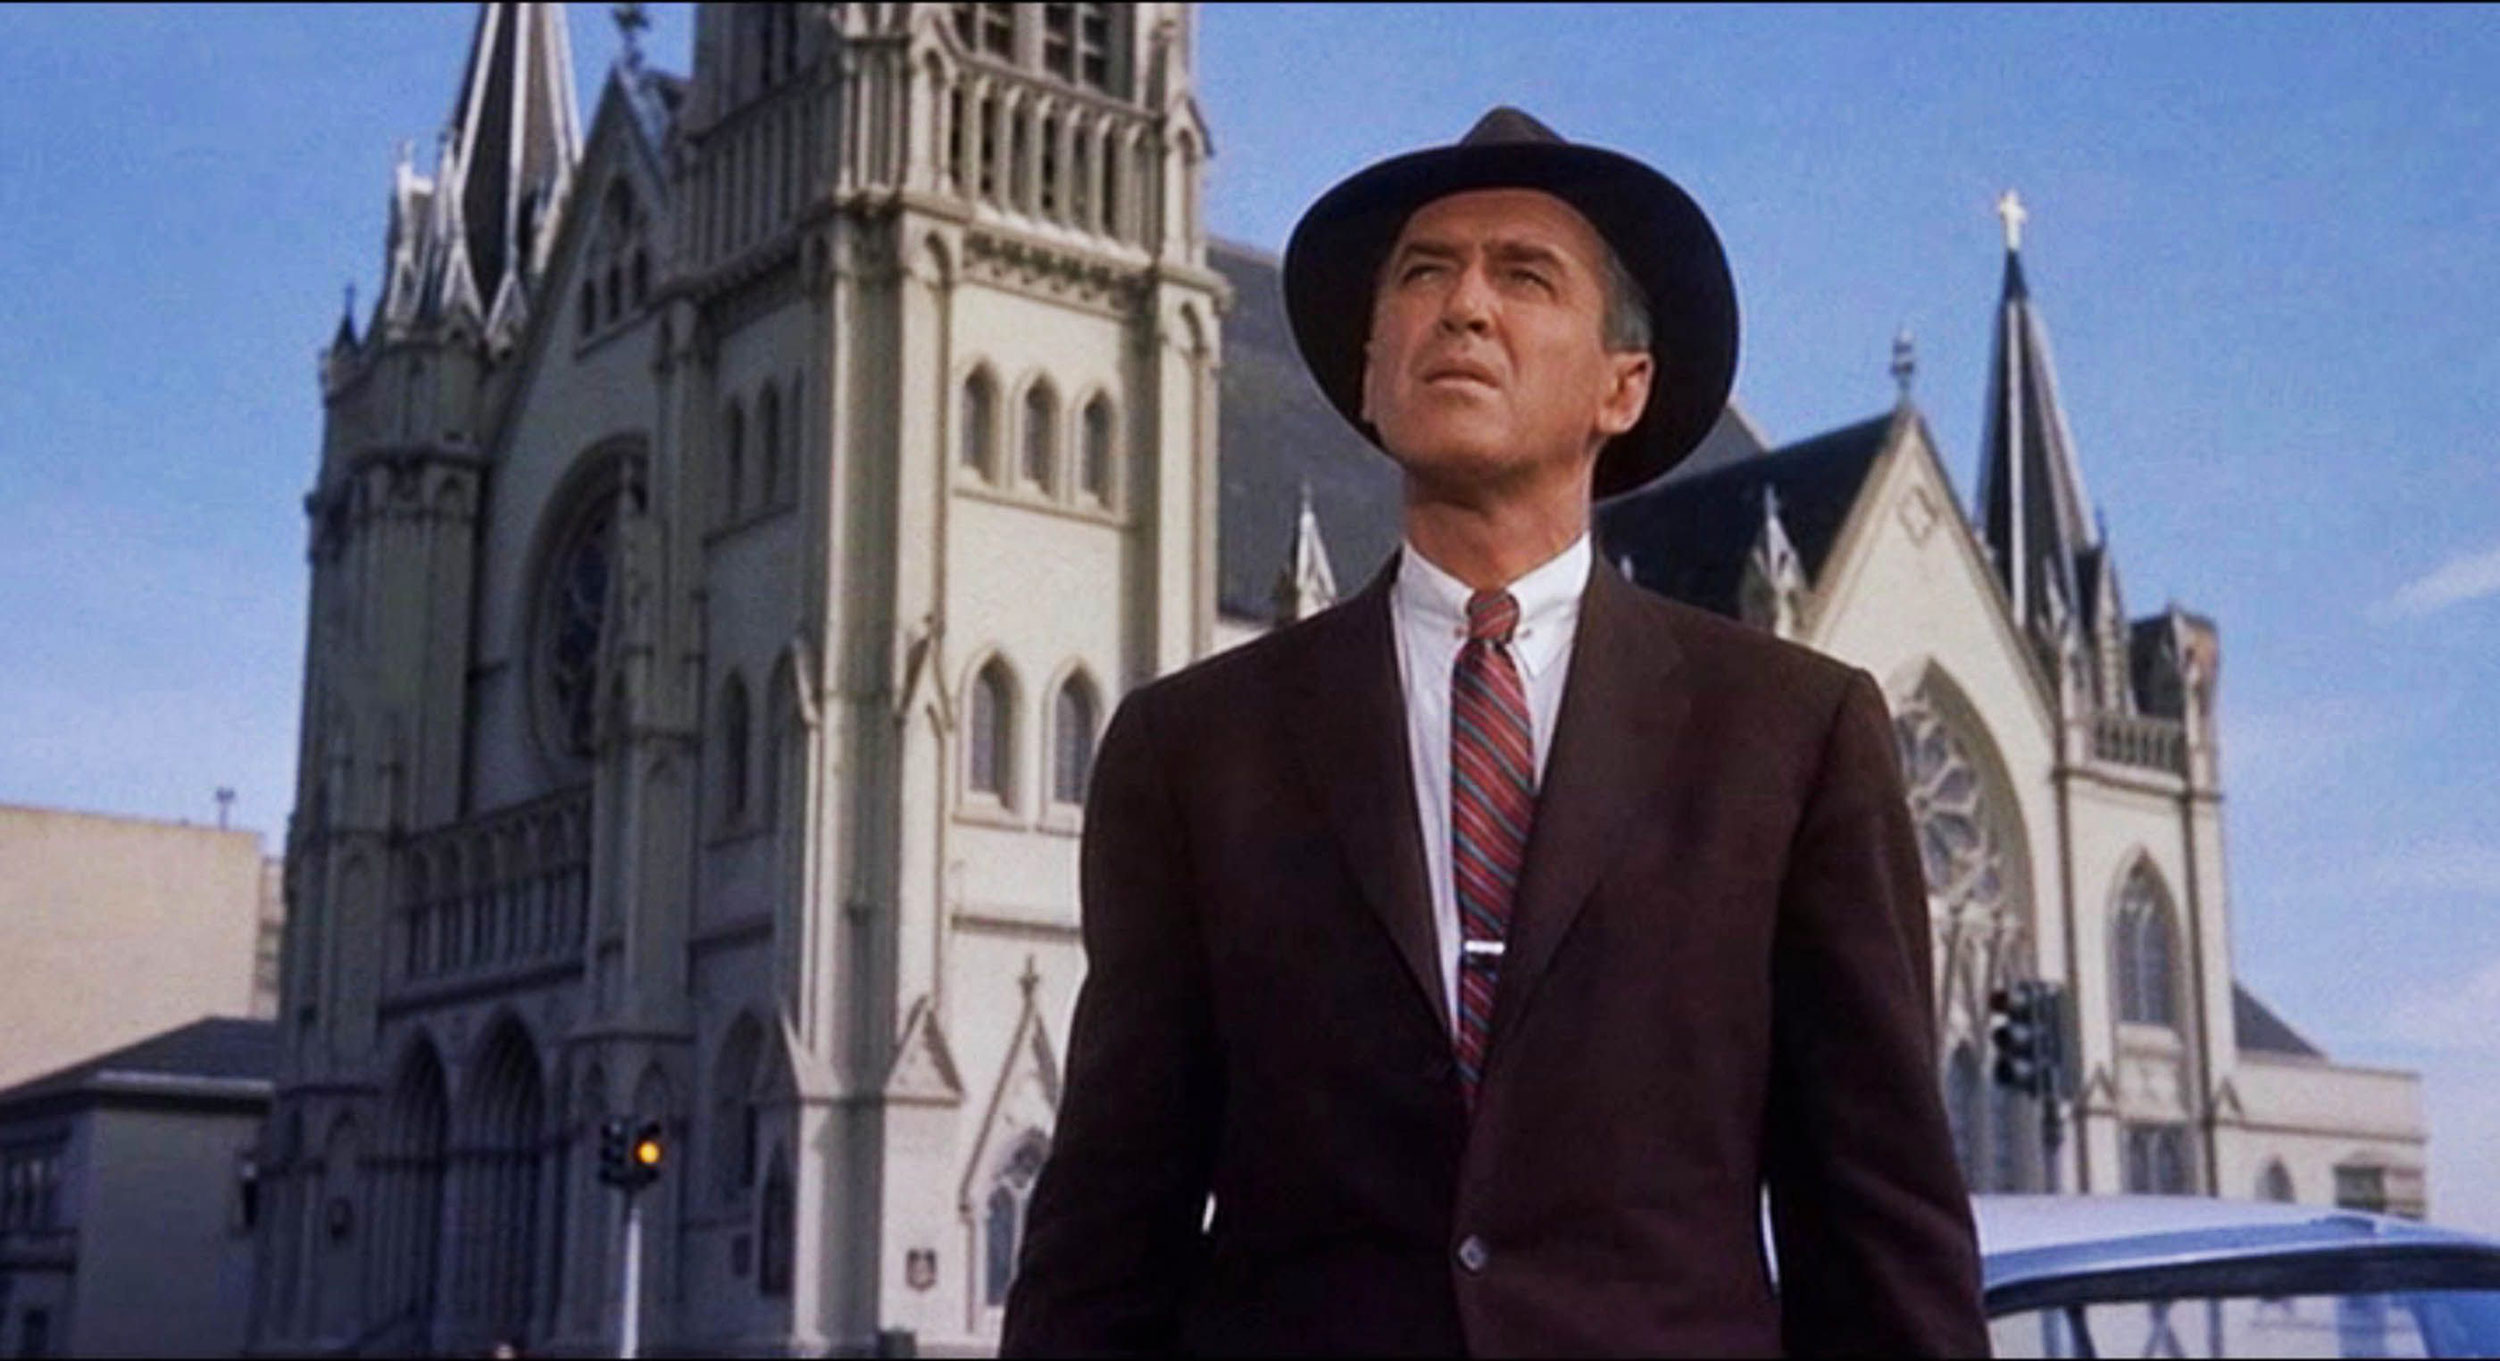 James Stewart stands outside the Mission Dolores Church in San Francisco on a bright sunny day